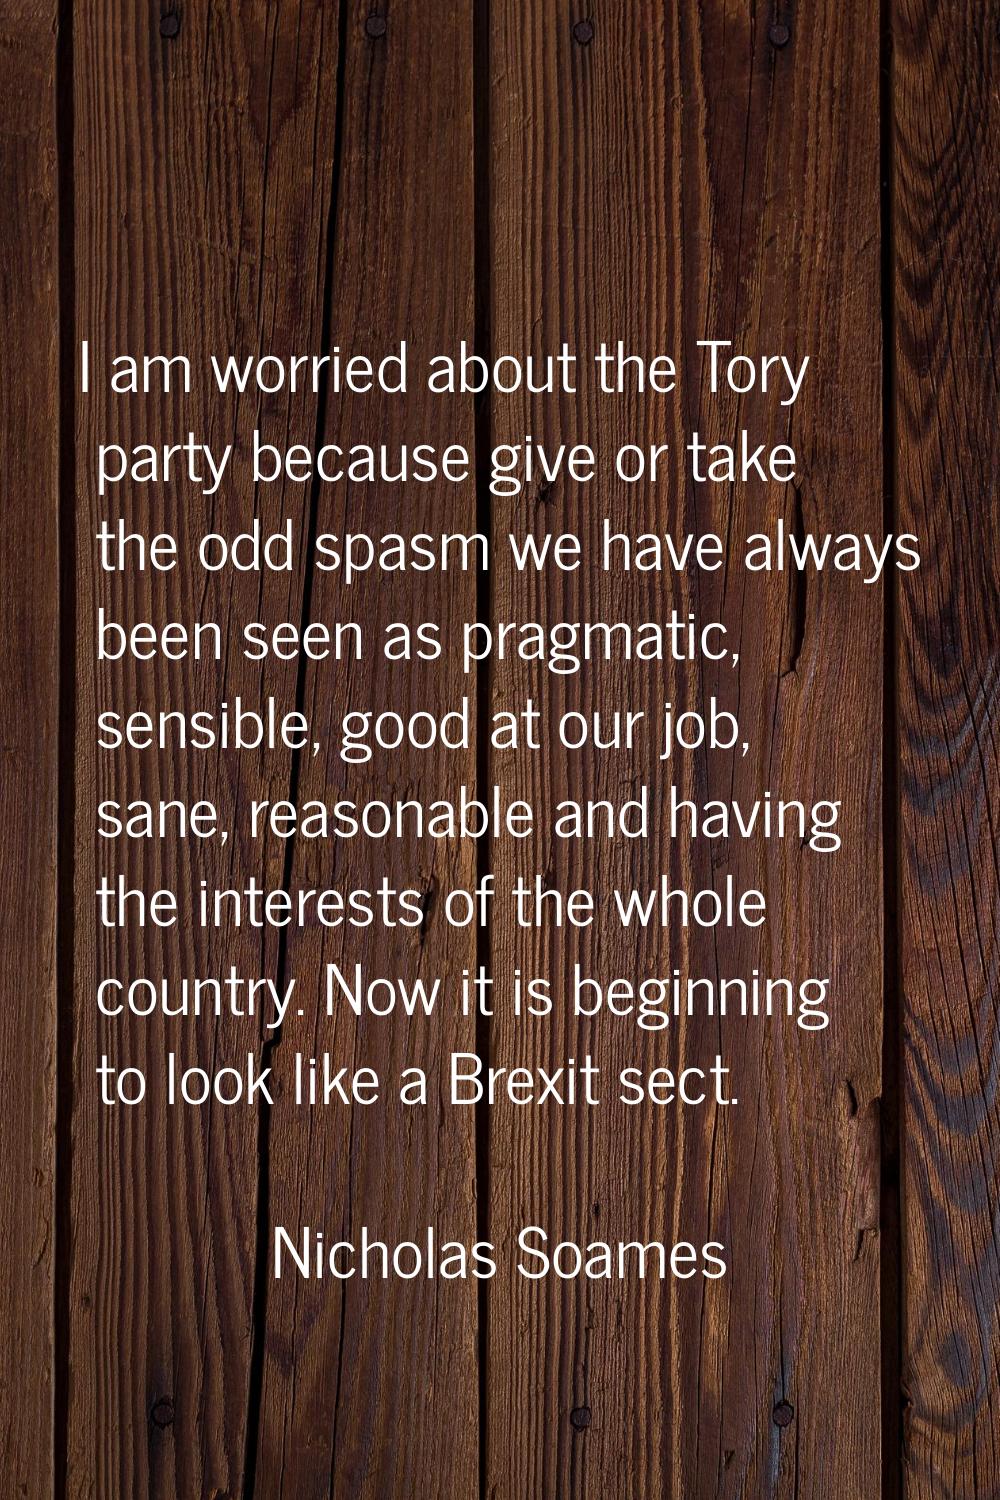 I am worried about the Tory party because give or take the odd spasm we have always been seen as pr